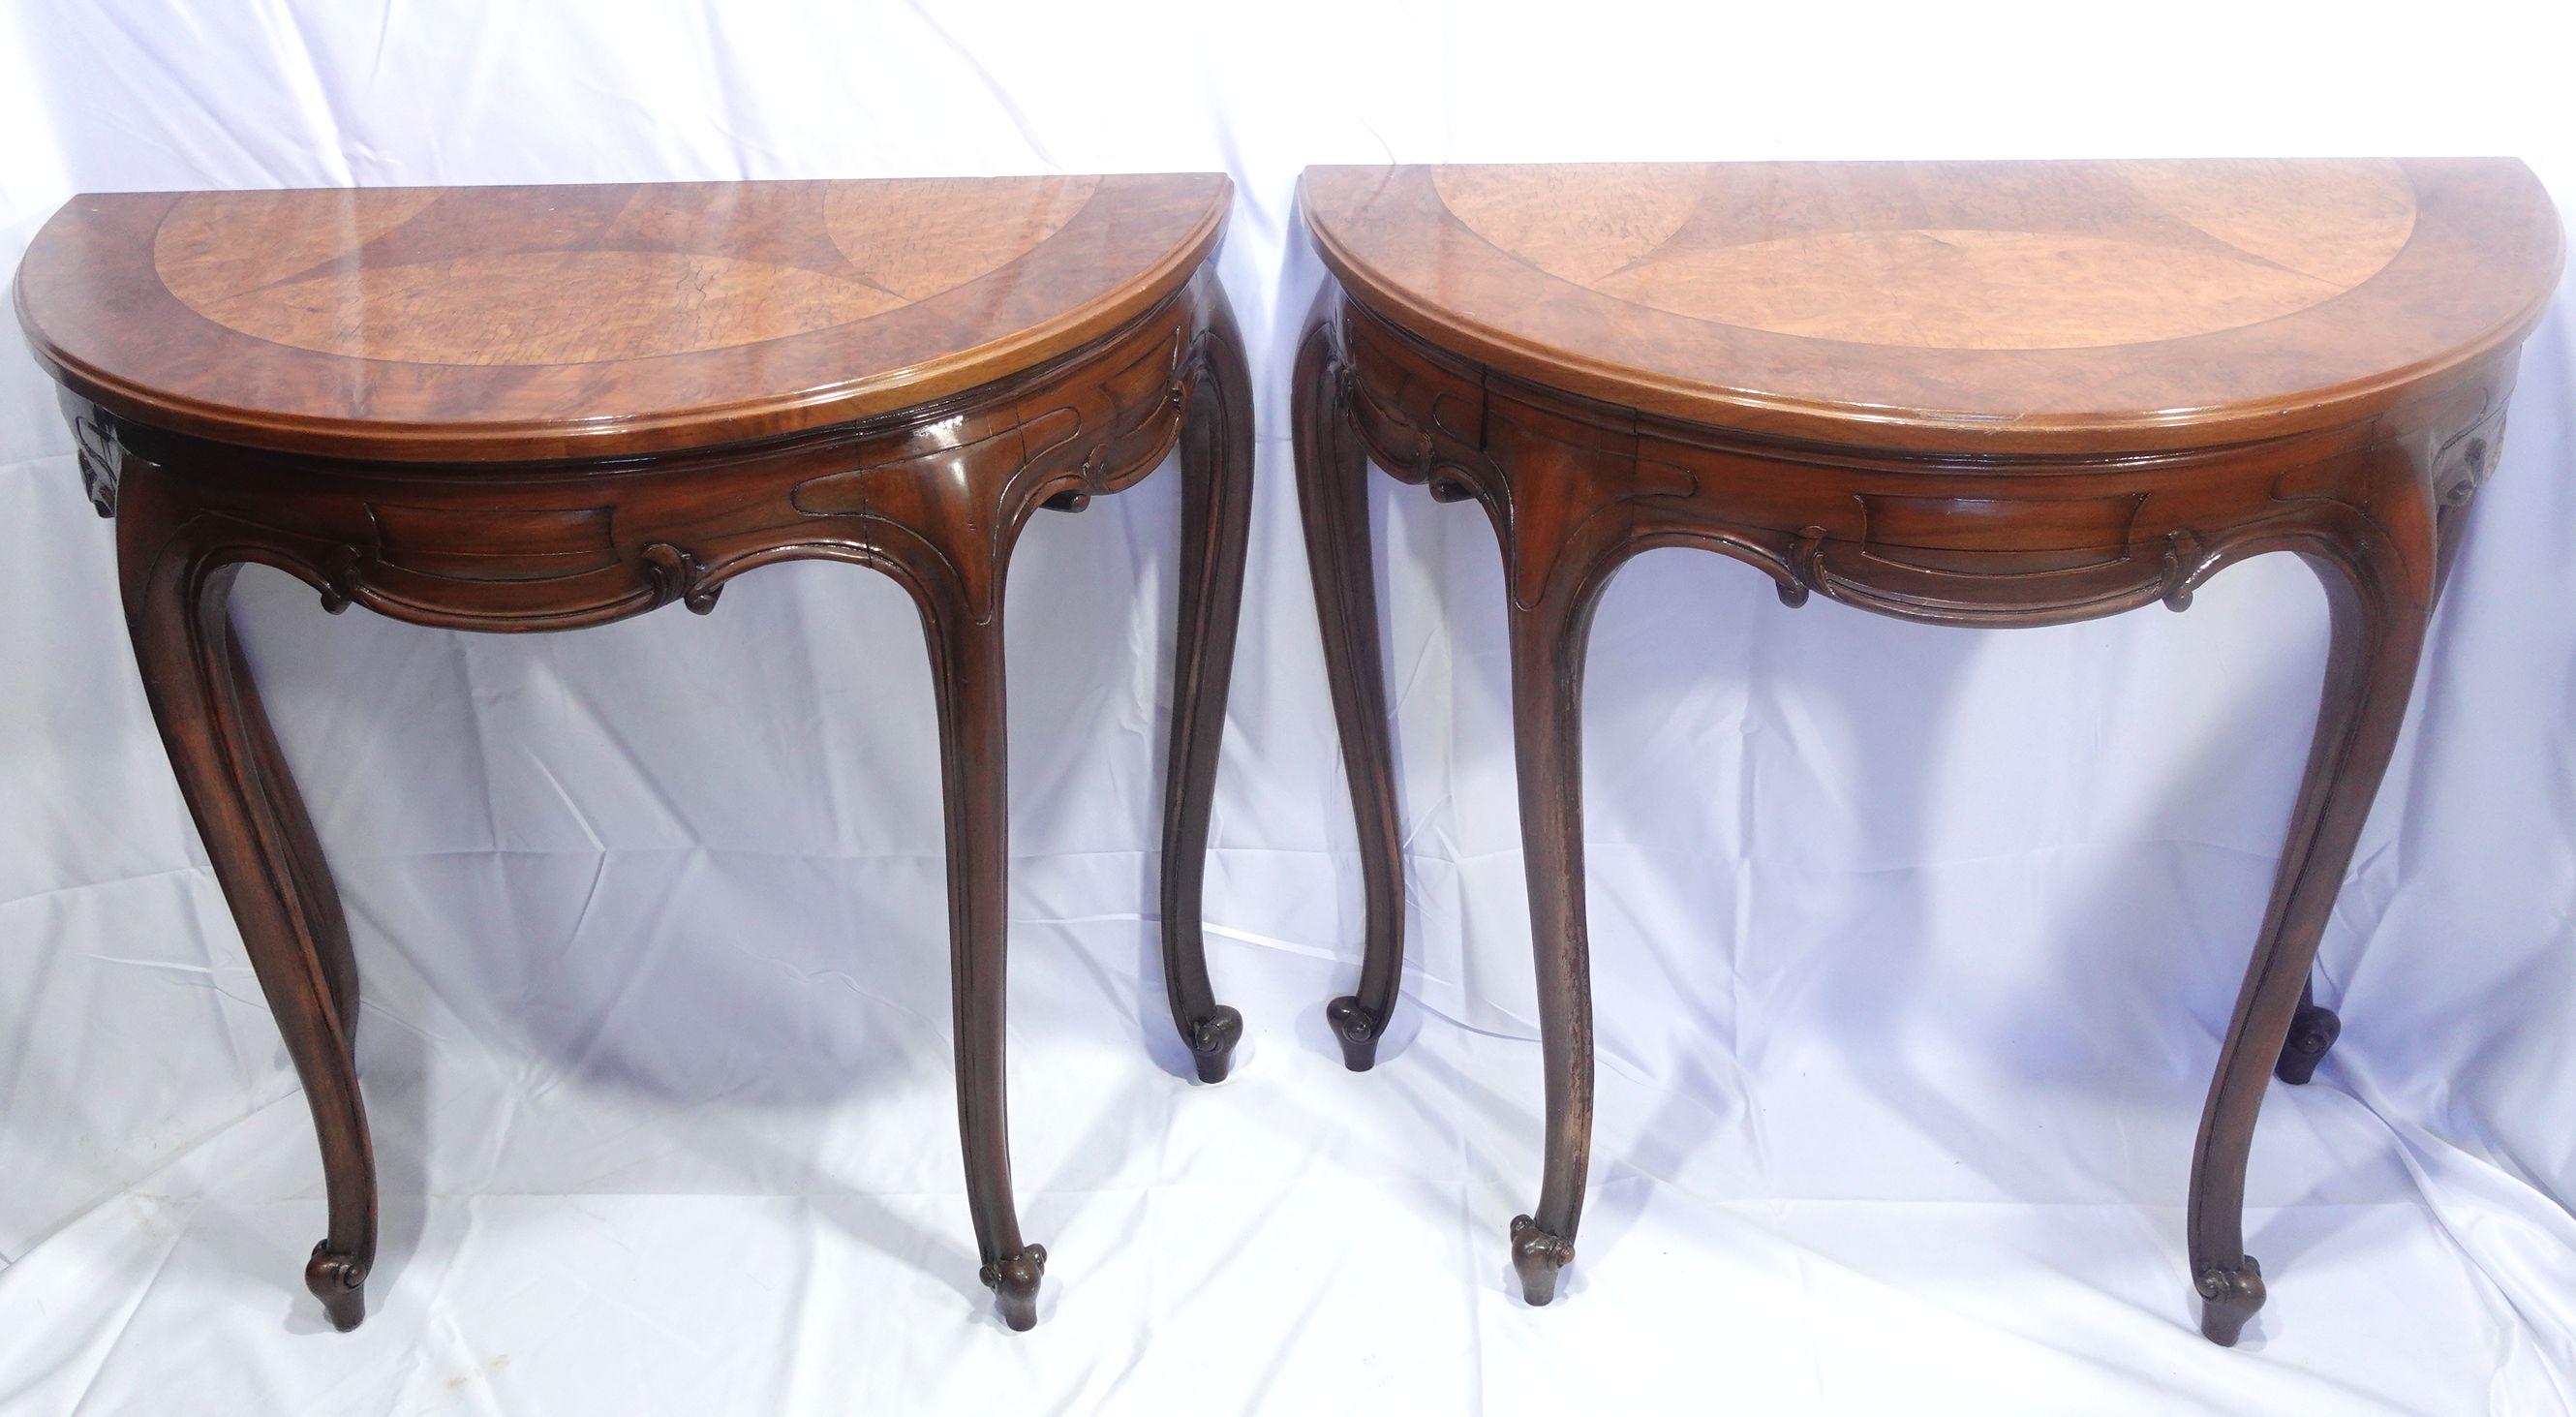 Antique Pair of Venetian Demilune Console Tables, 19th Century  In Good Condition For Sale In Norton, MA